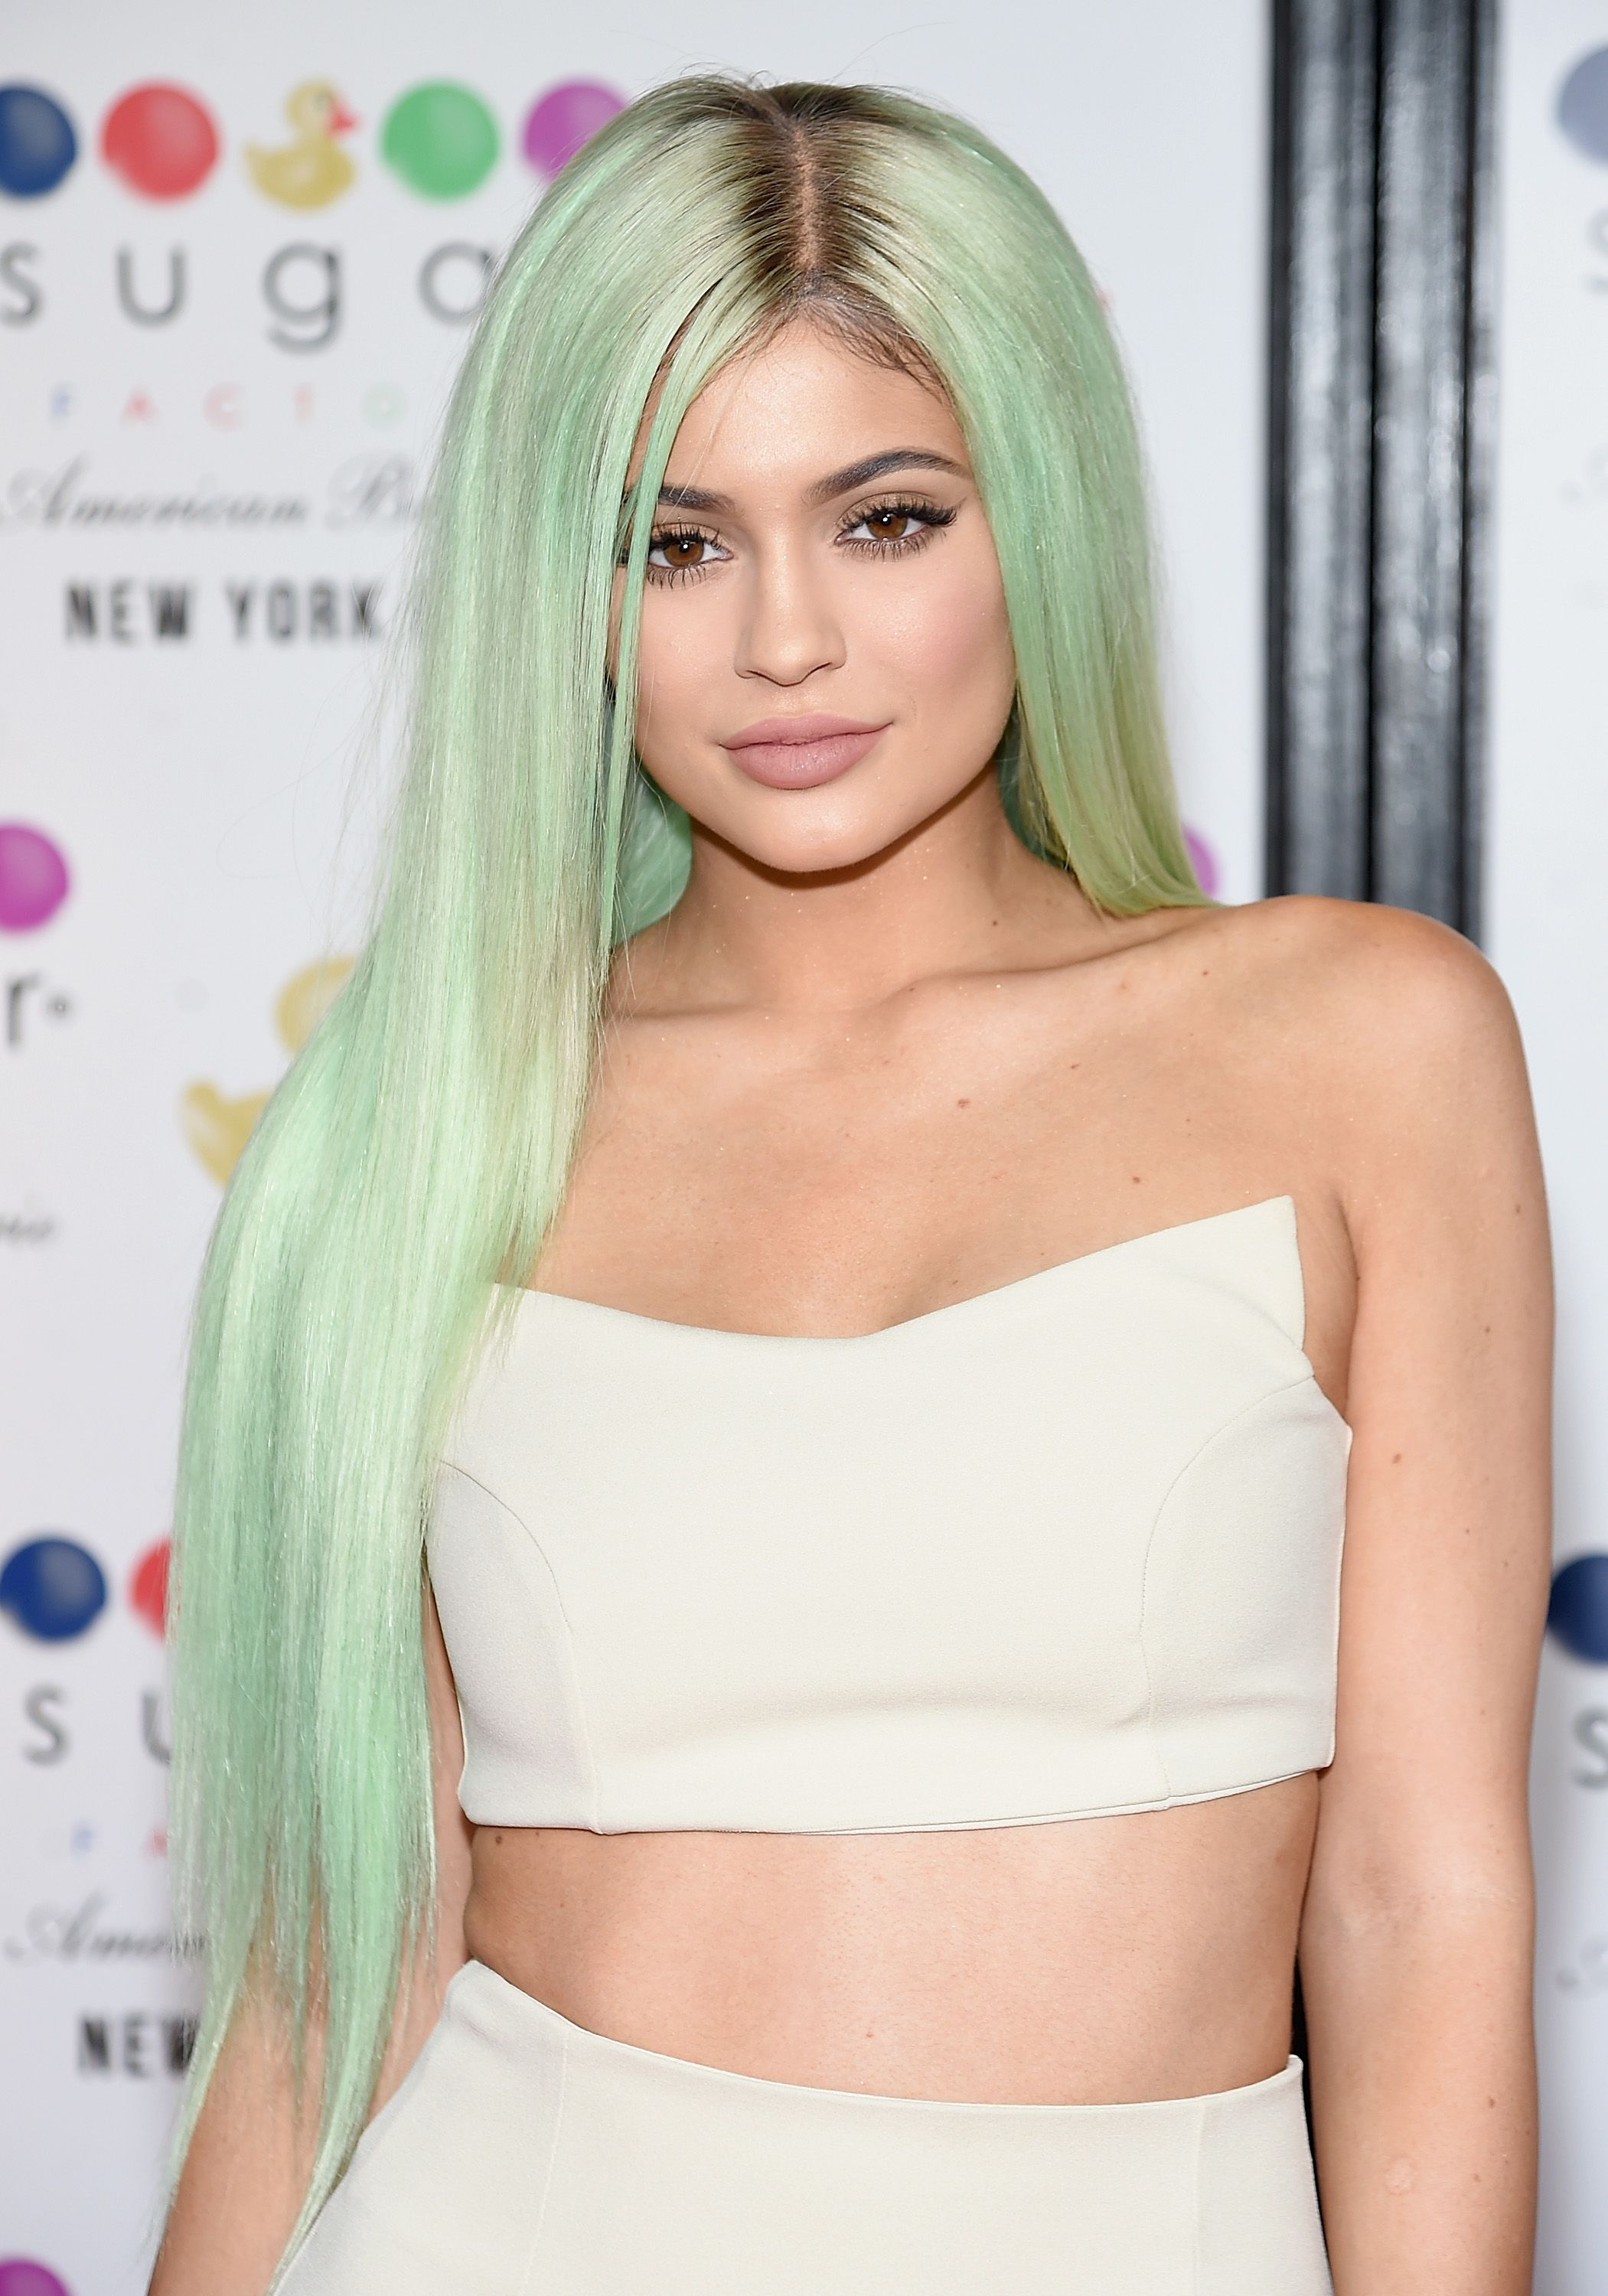 Kylie Jenner attending the opening of the Sugar Factory American Brasserie on September 16, 2015. | Source: Getty Images